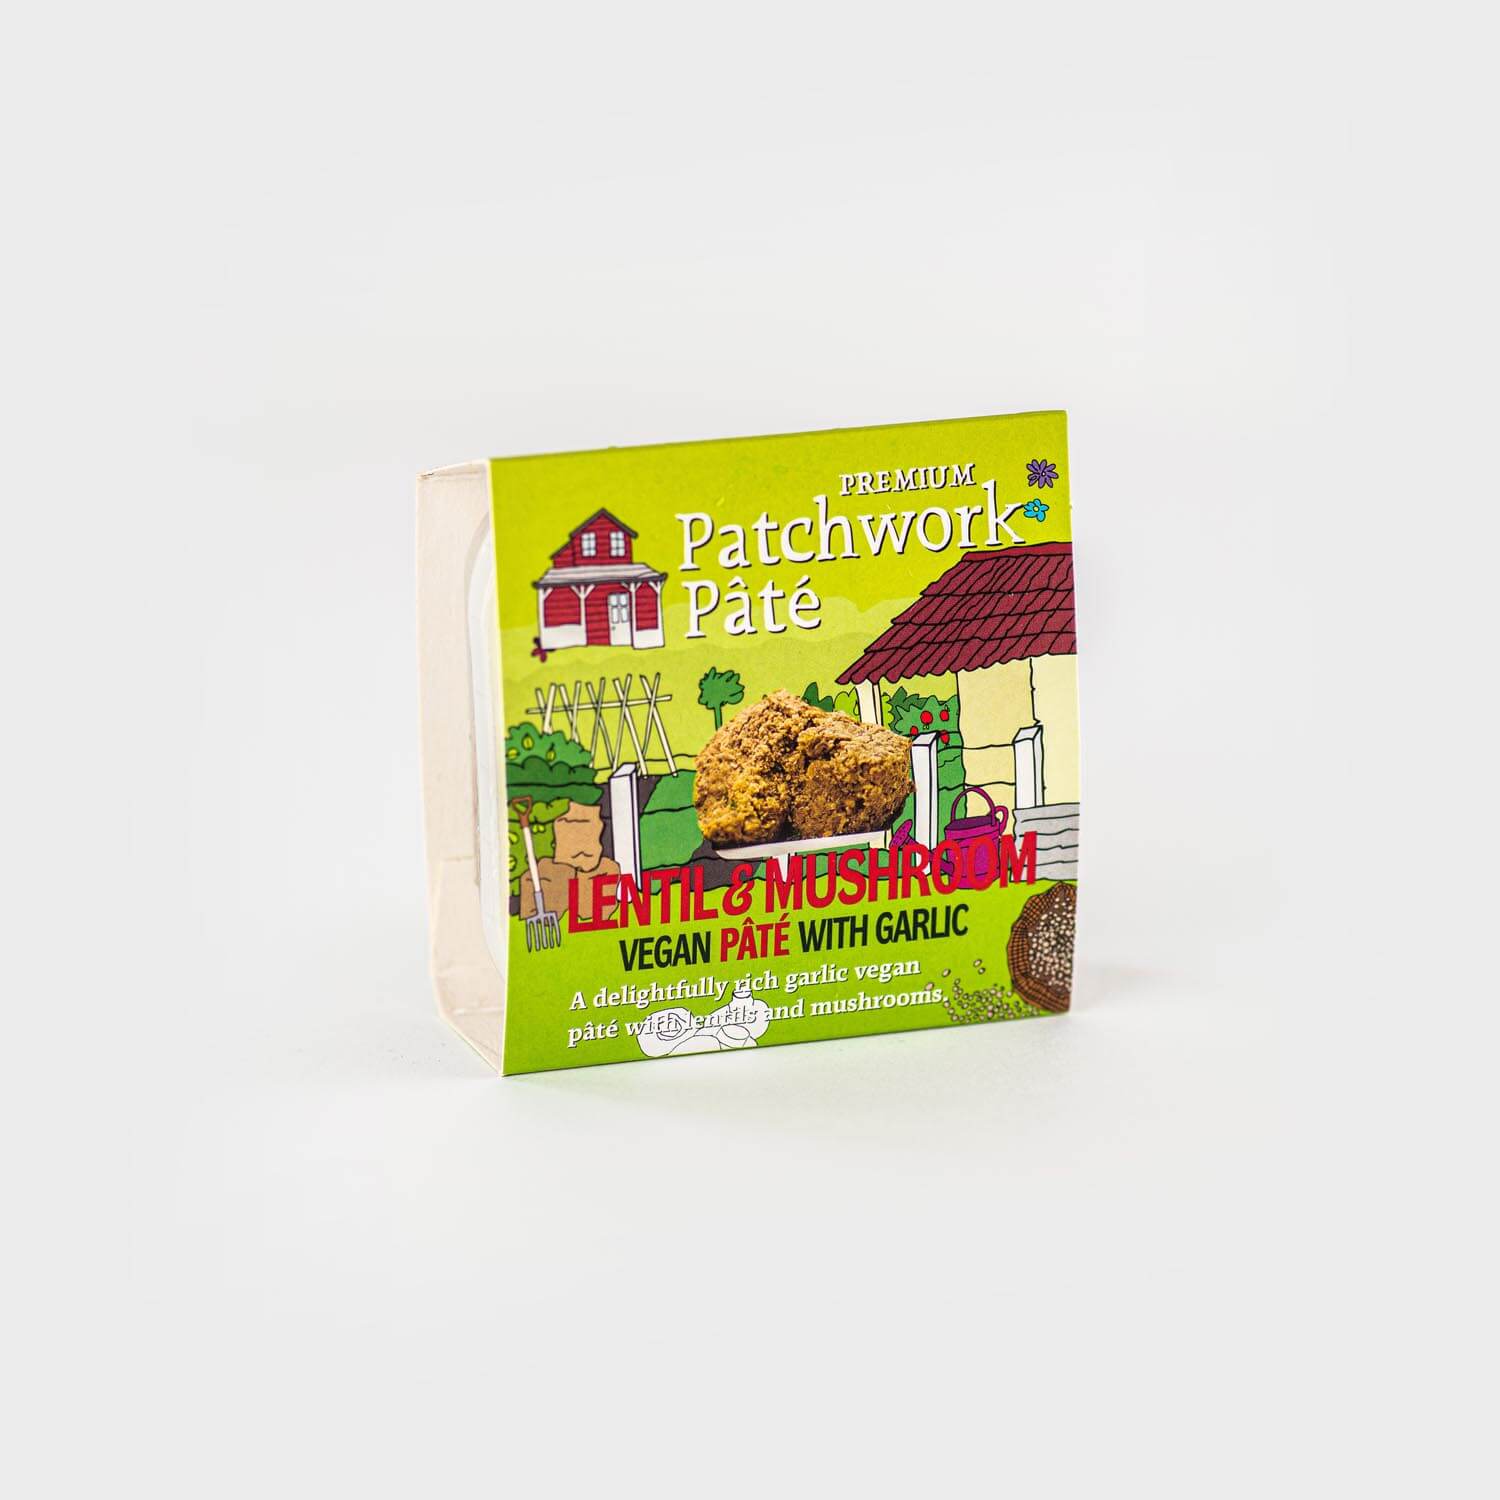 A glimpse of diverse products by Patchwork Foods, supporting the UK economy on YouK.